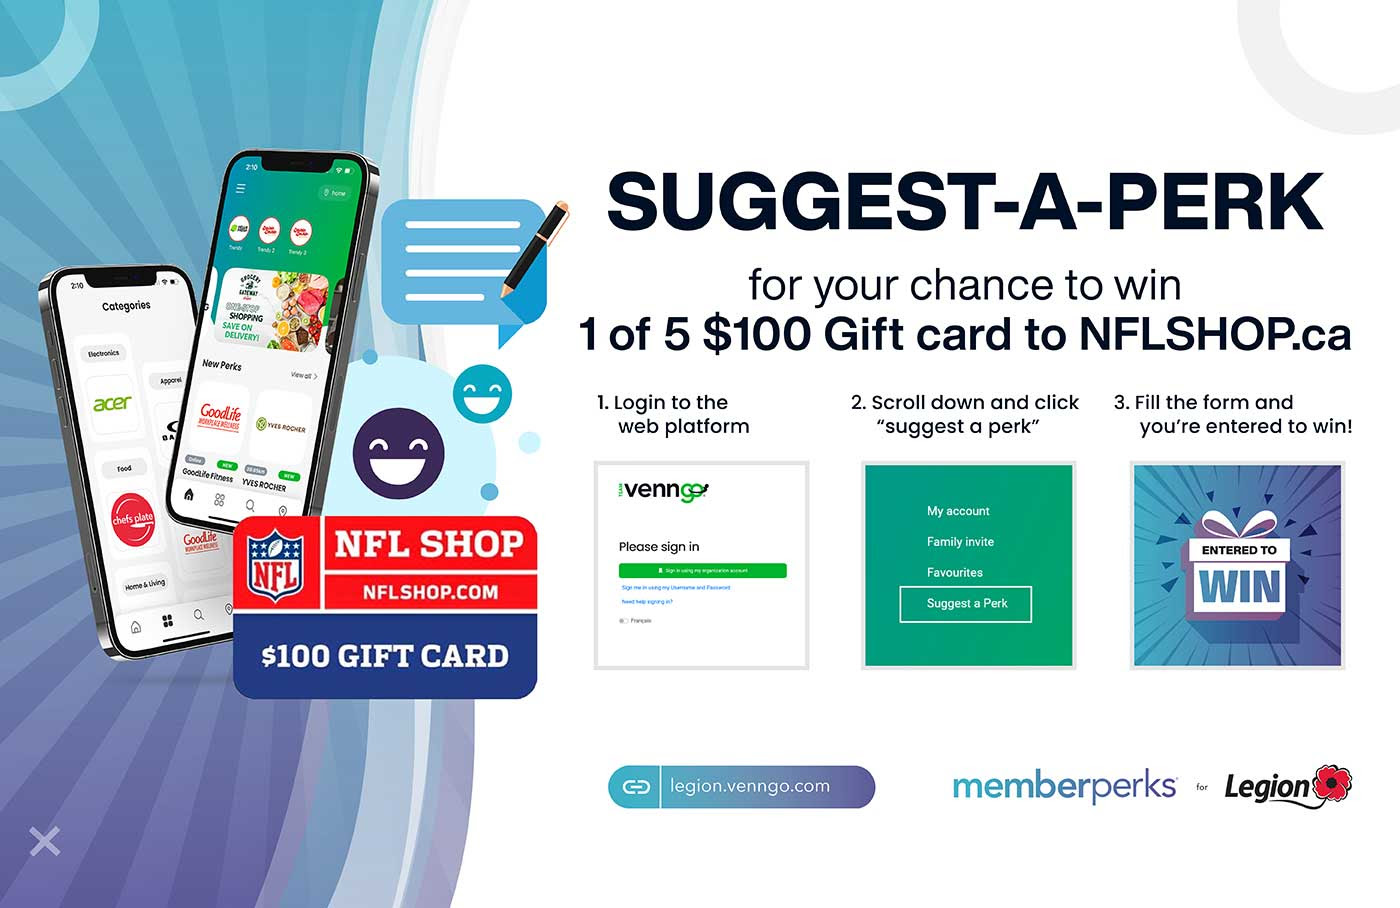 Suggest a perk for your chance
to win 1 of 5 $100 Gift cards to
NFLSHOP.ca.